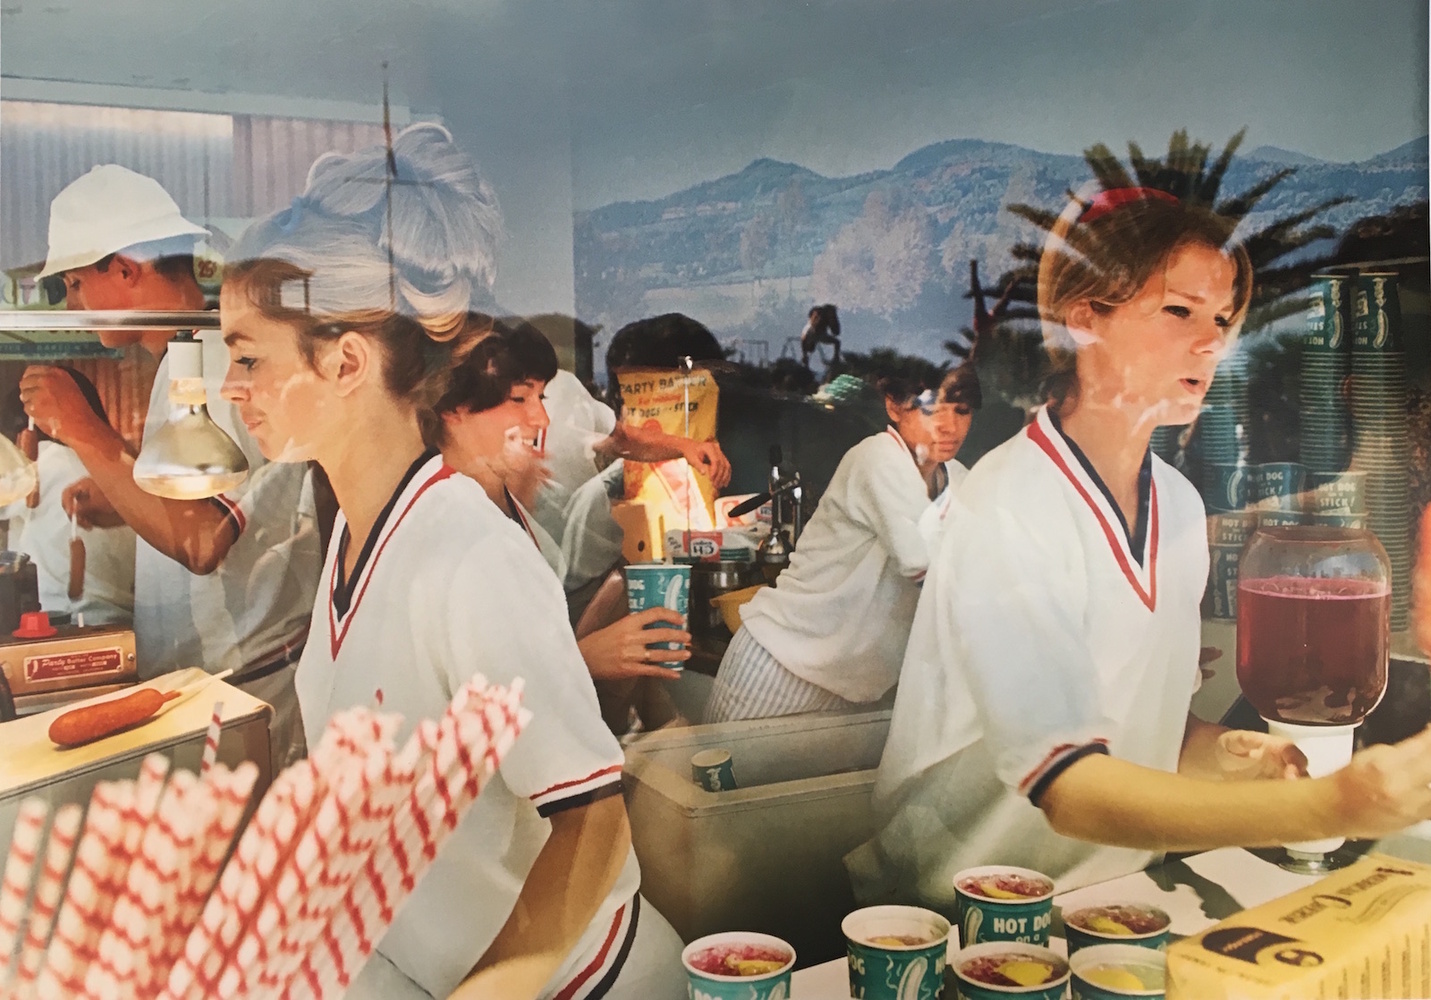 Untitled (woman serving soda and hot dogs), 1966